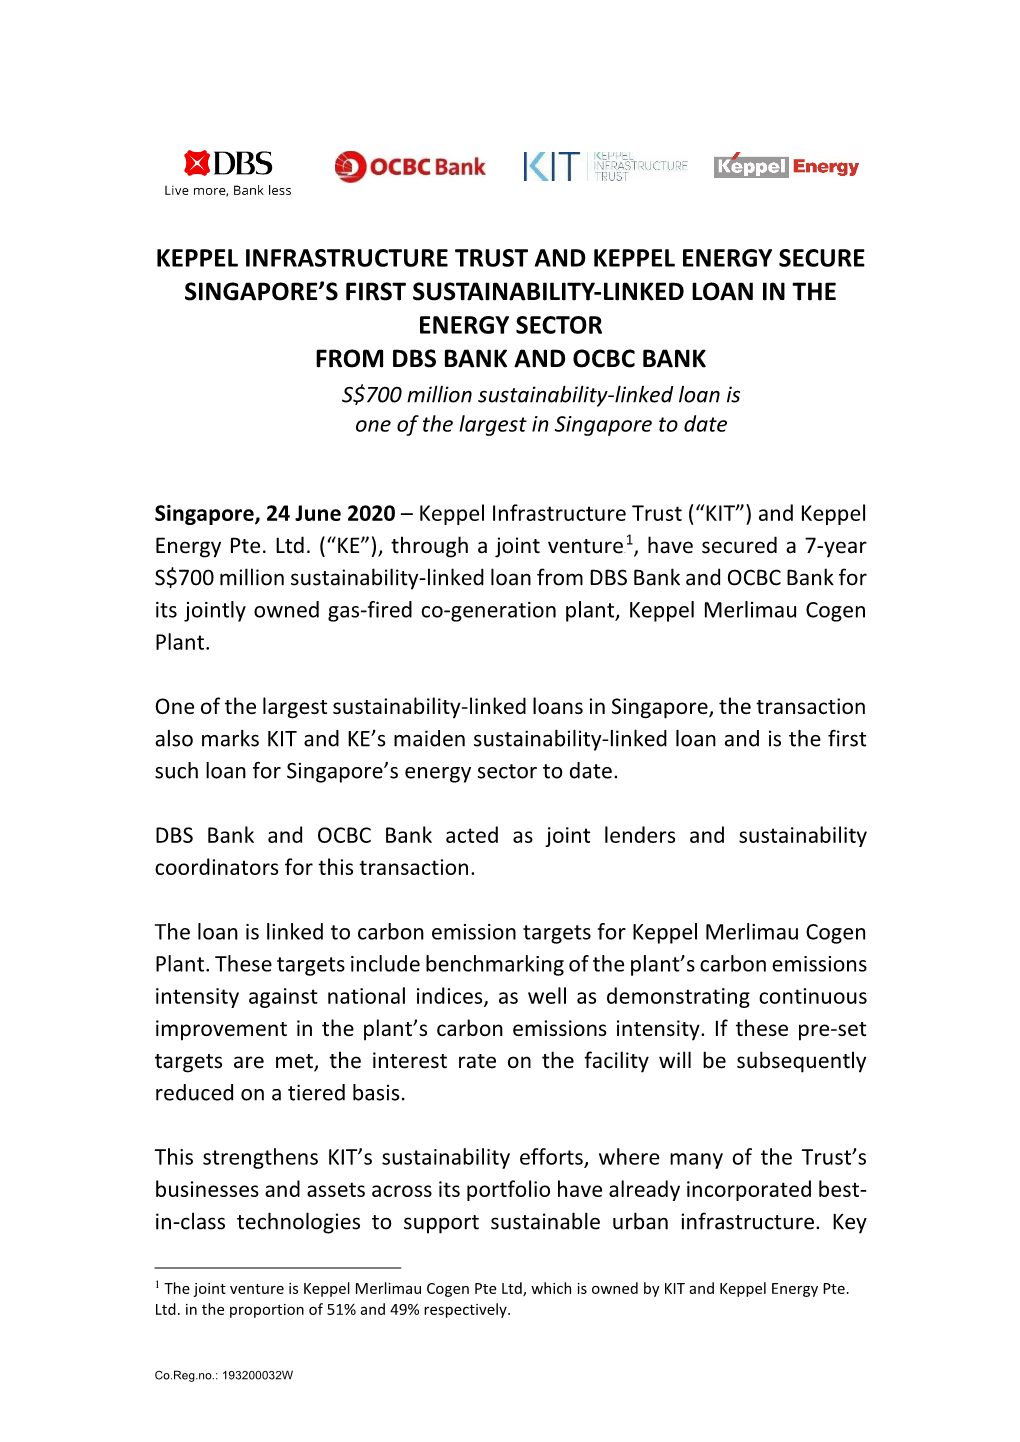 Keppel Infrastructure Trust and Keppel Energy